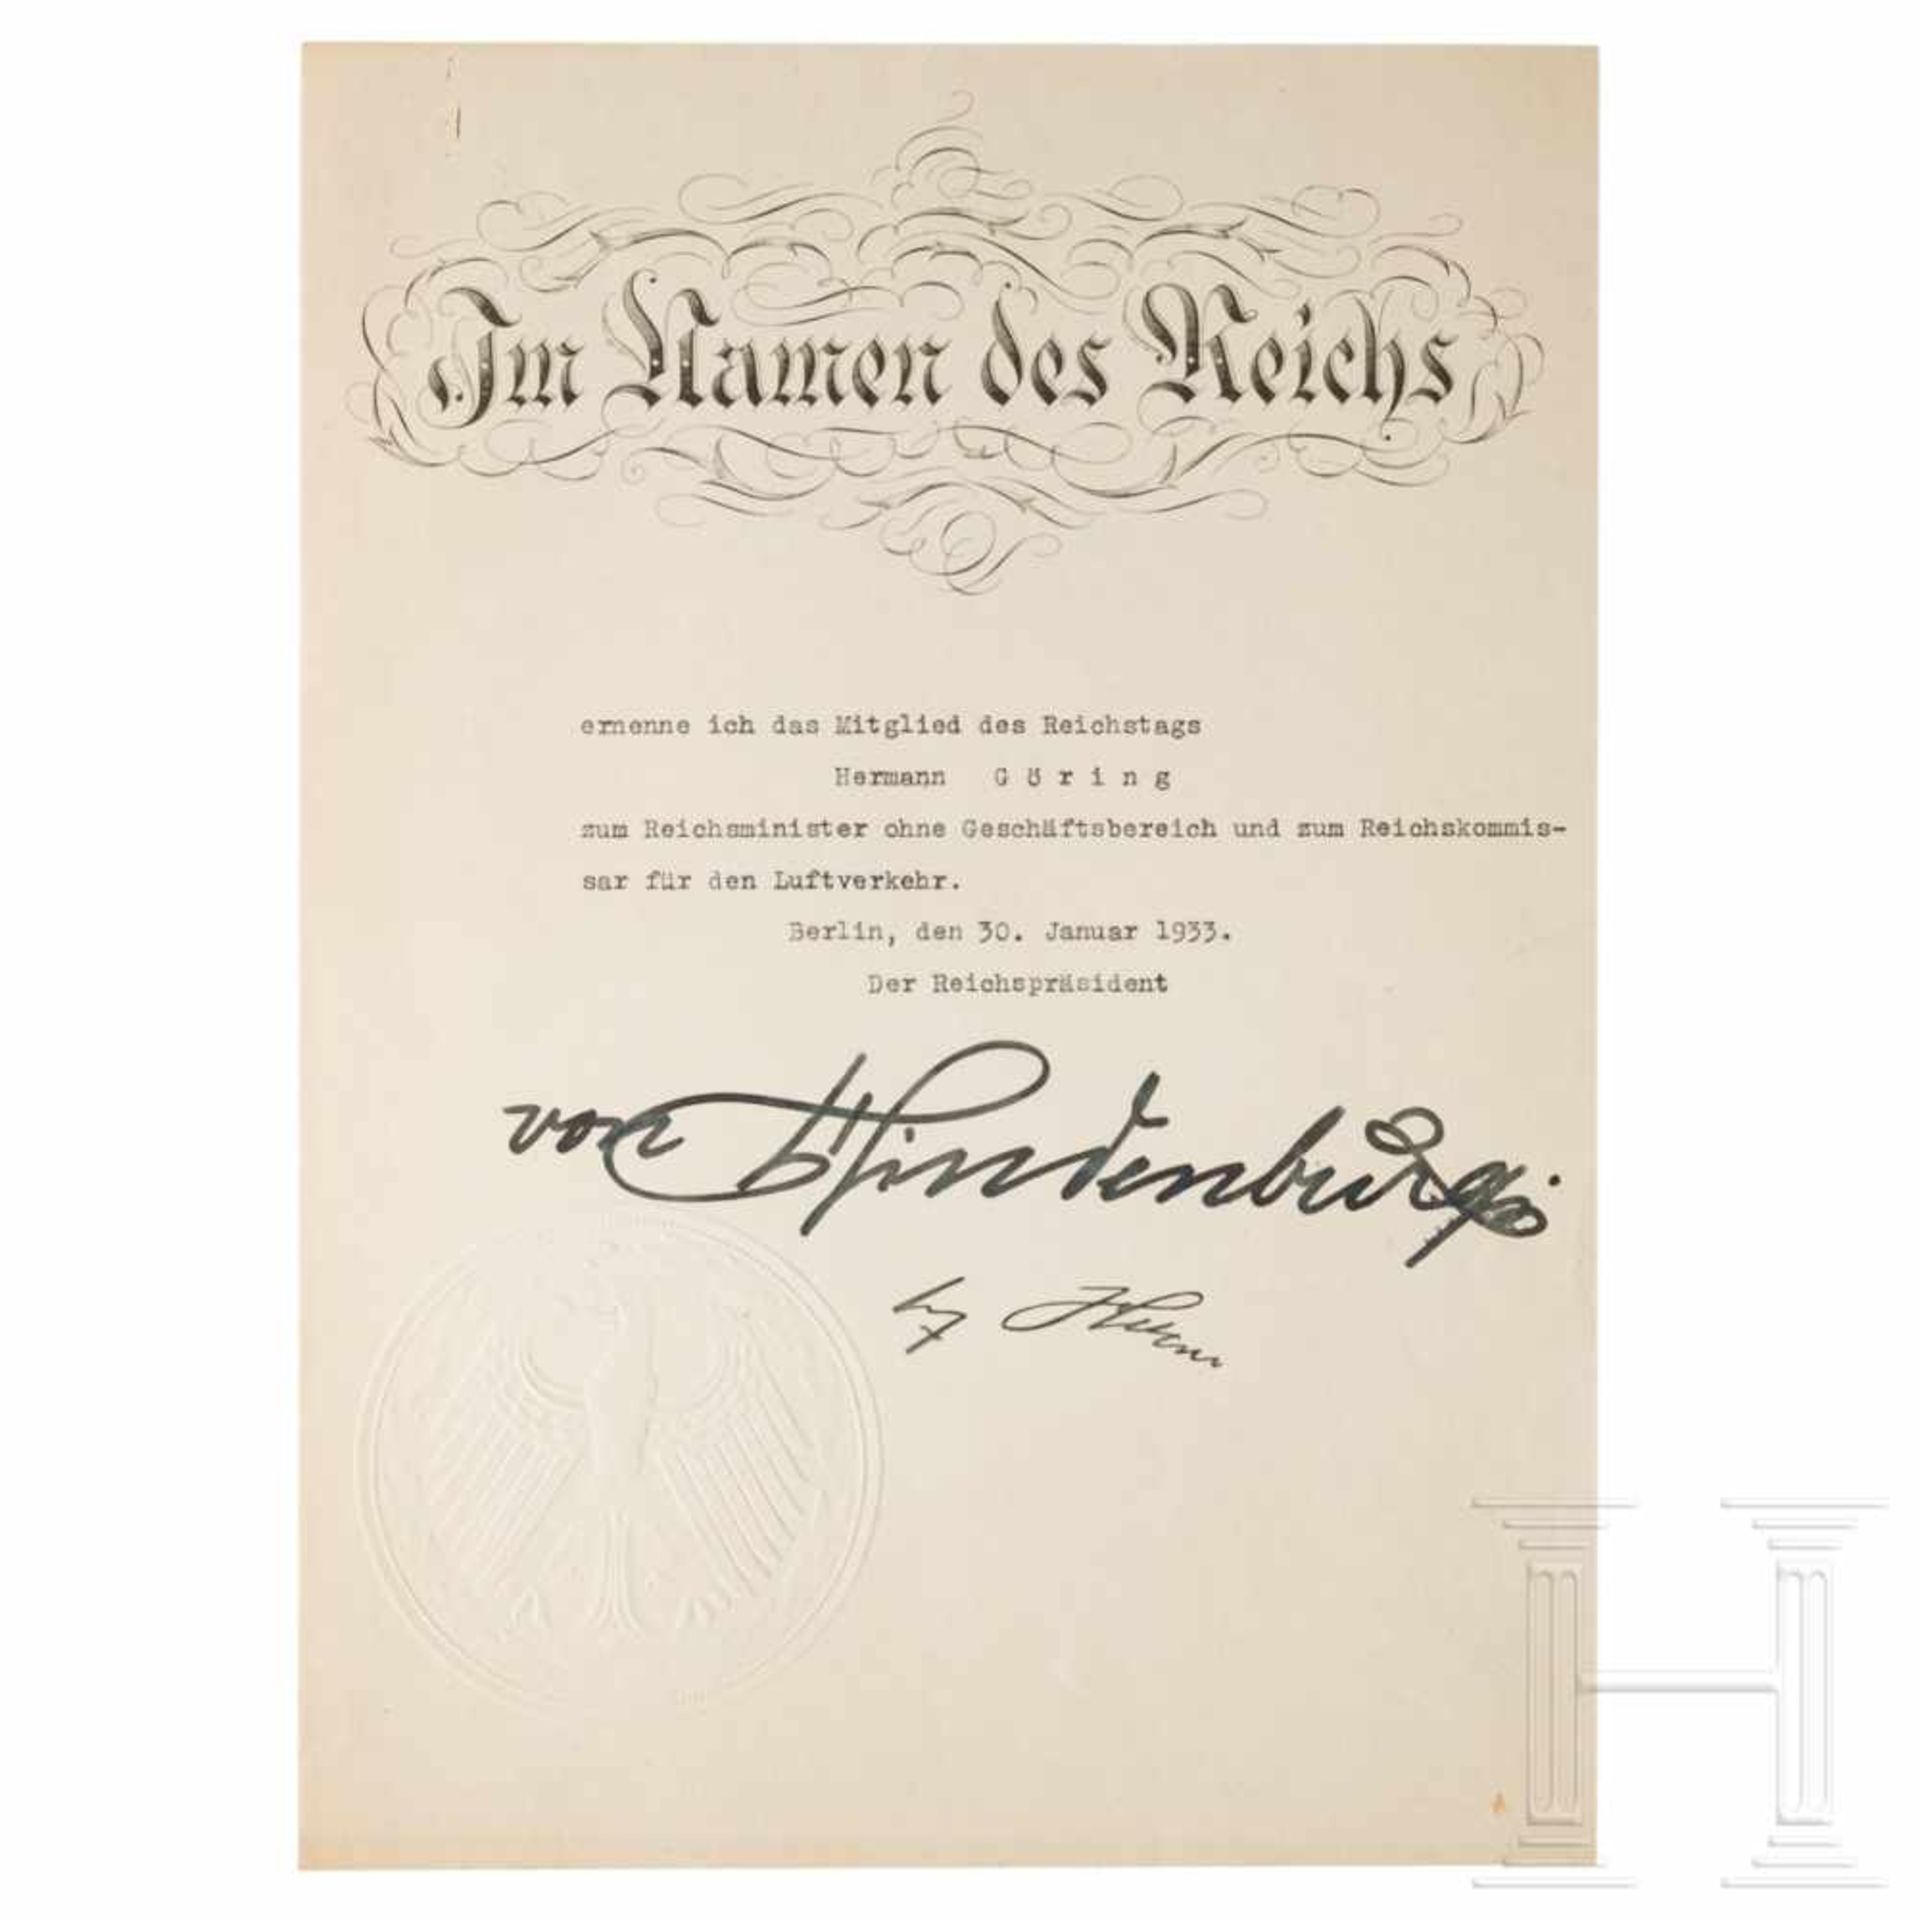 Göring's certificate of appointment to Reichsminister without portfolio and to Reichskommissar for